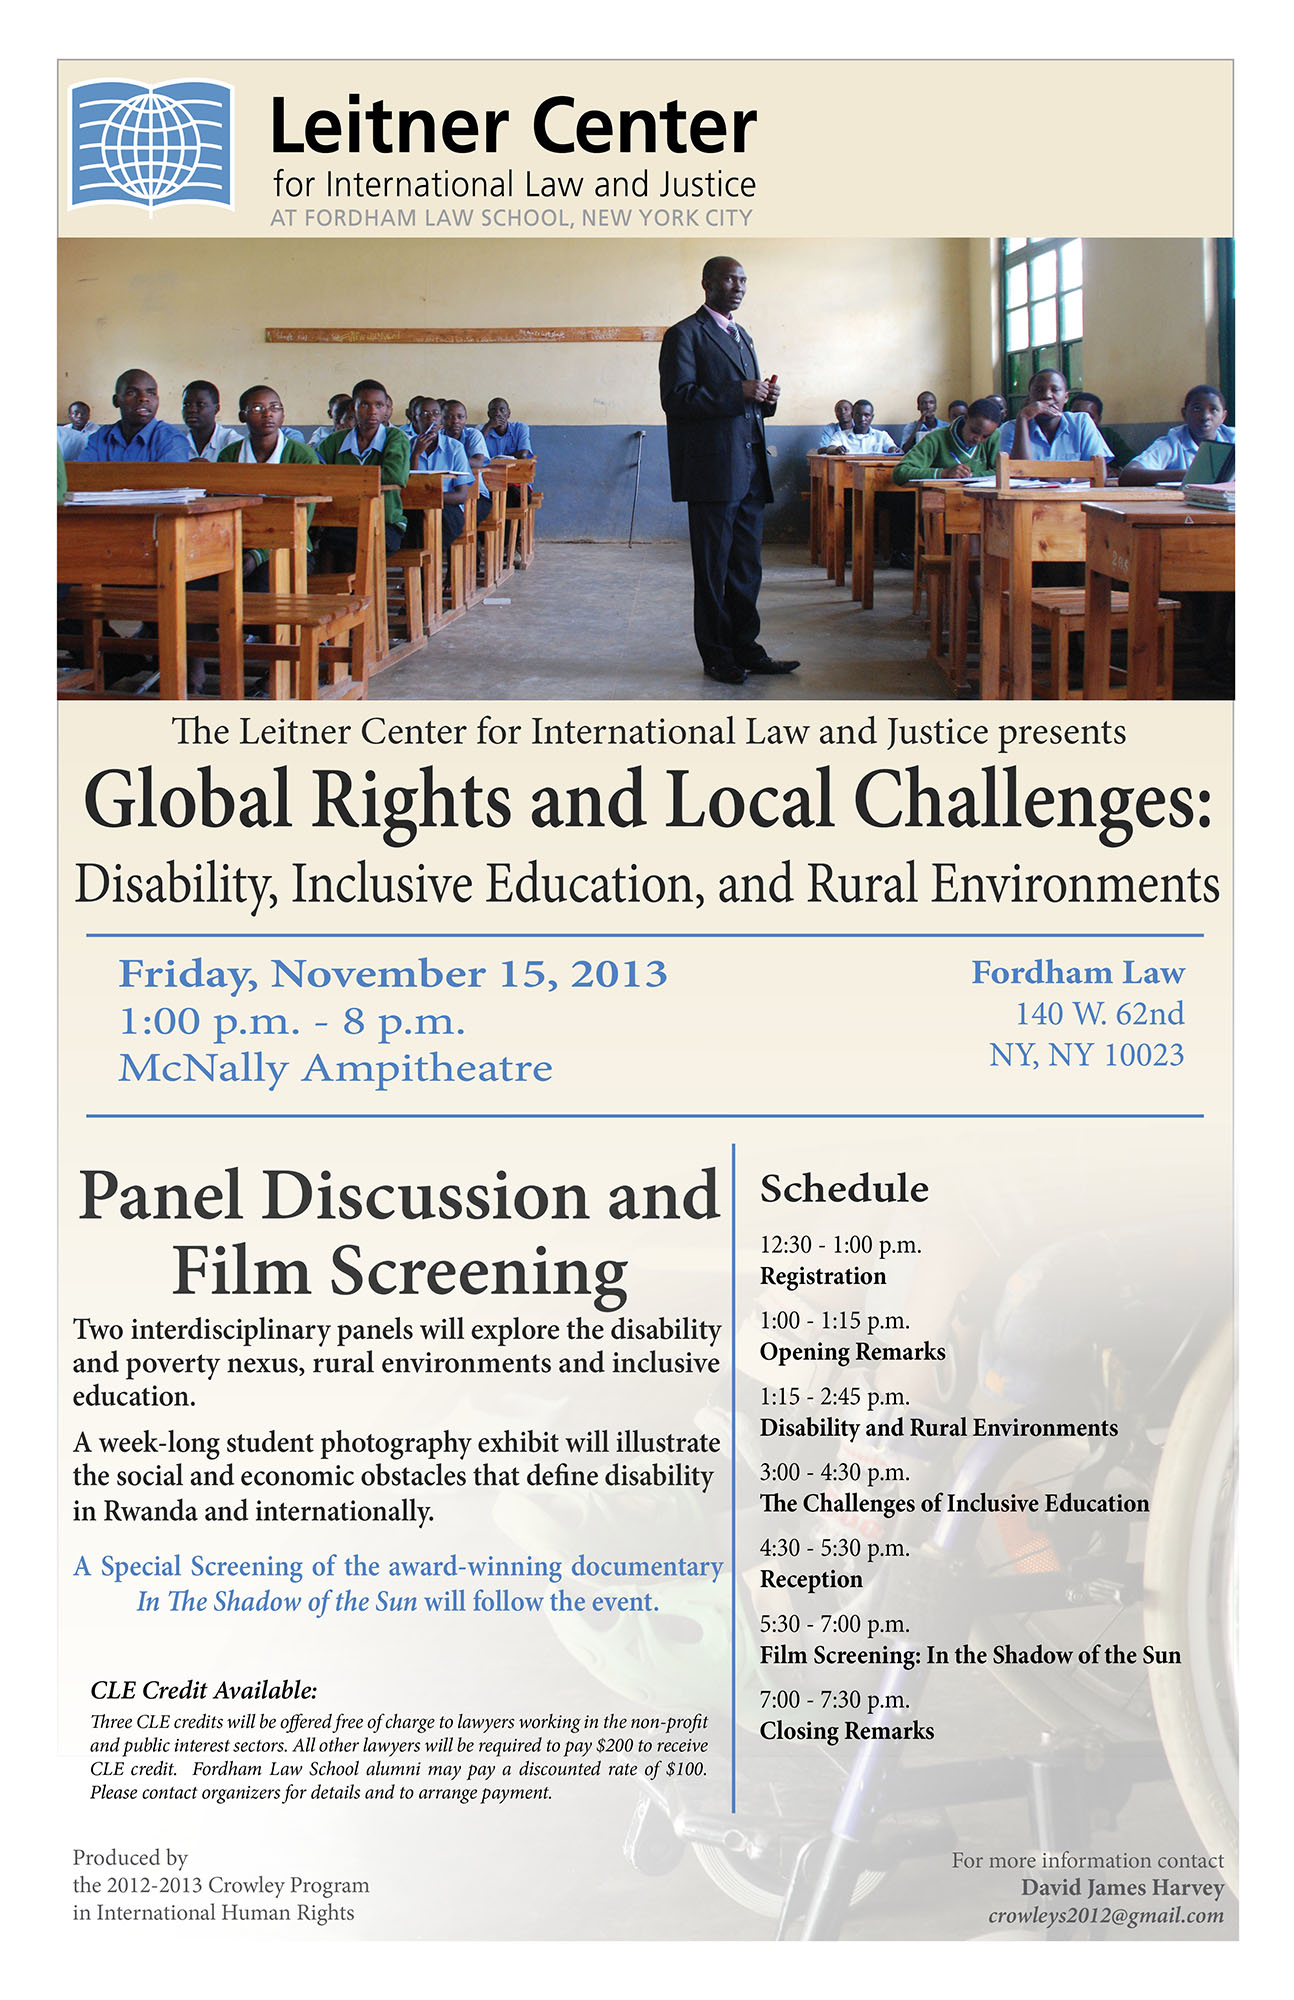 global rights and local challenges: disability, inclusive education and rural environments